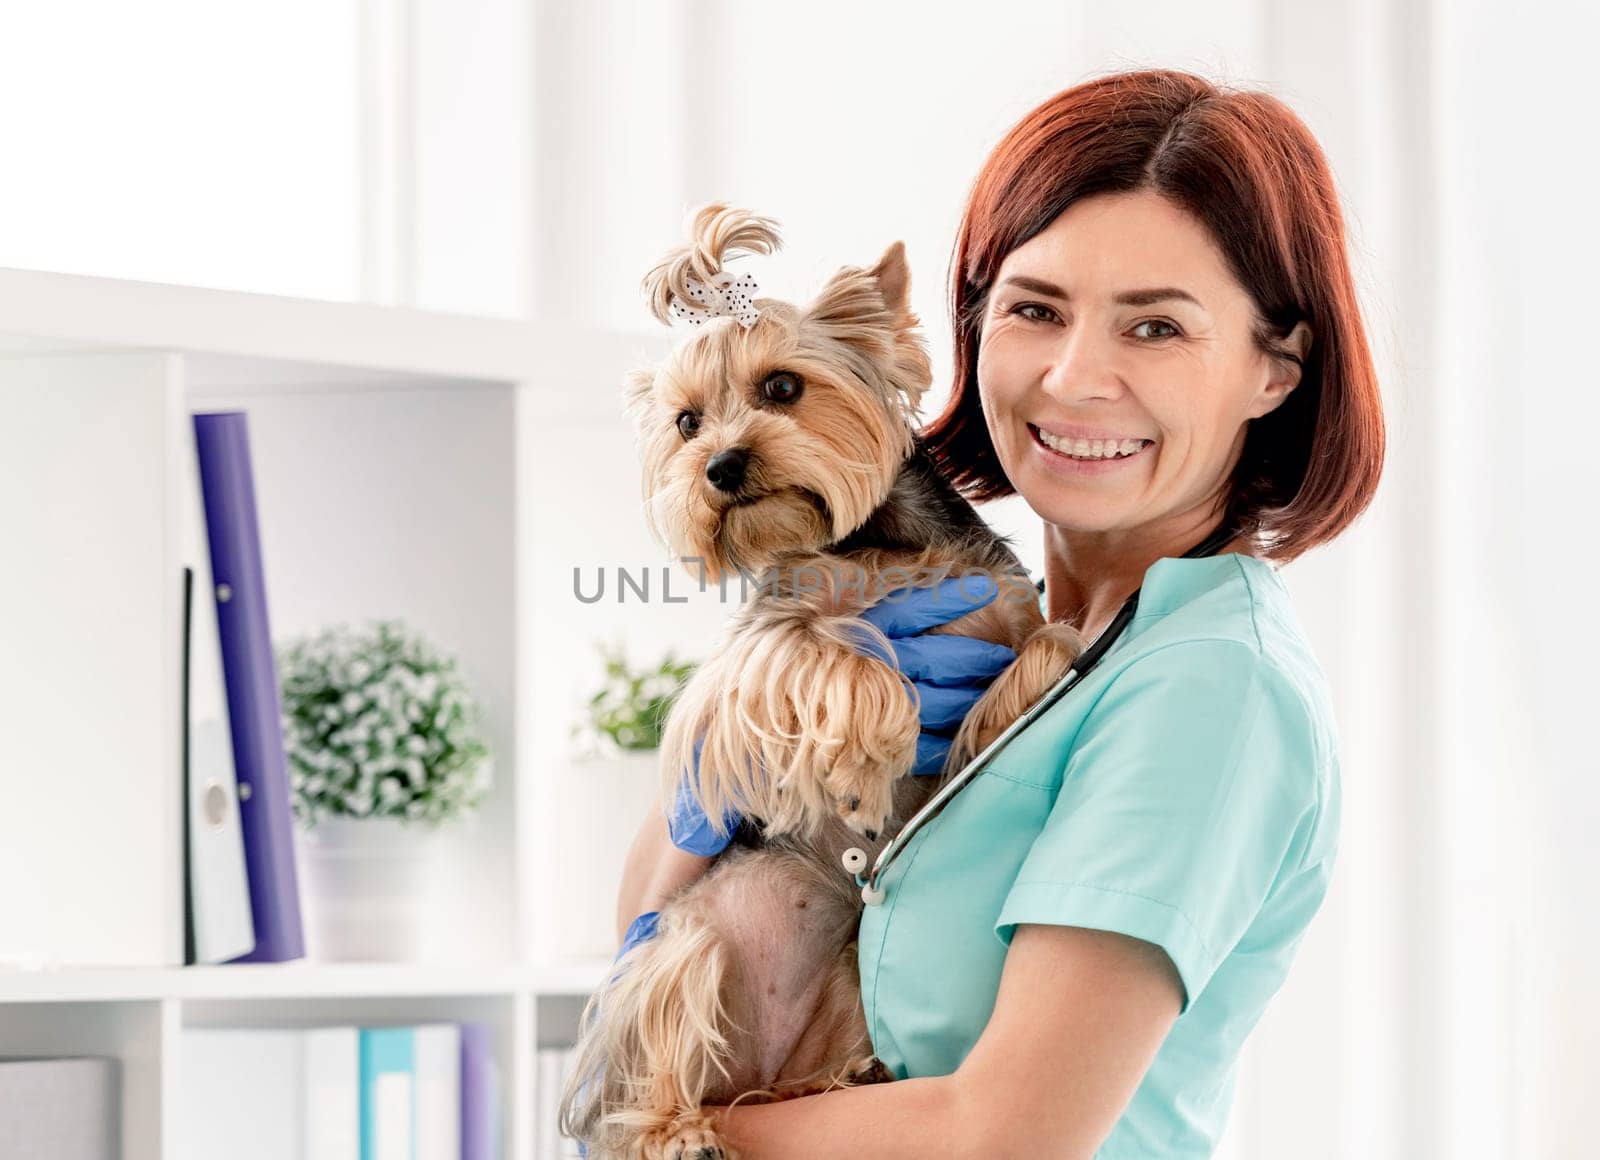 Yorkshire terrier on hands of smiling veterinarian woman during appointment in veterinary clinic